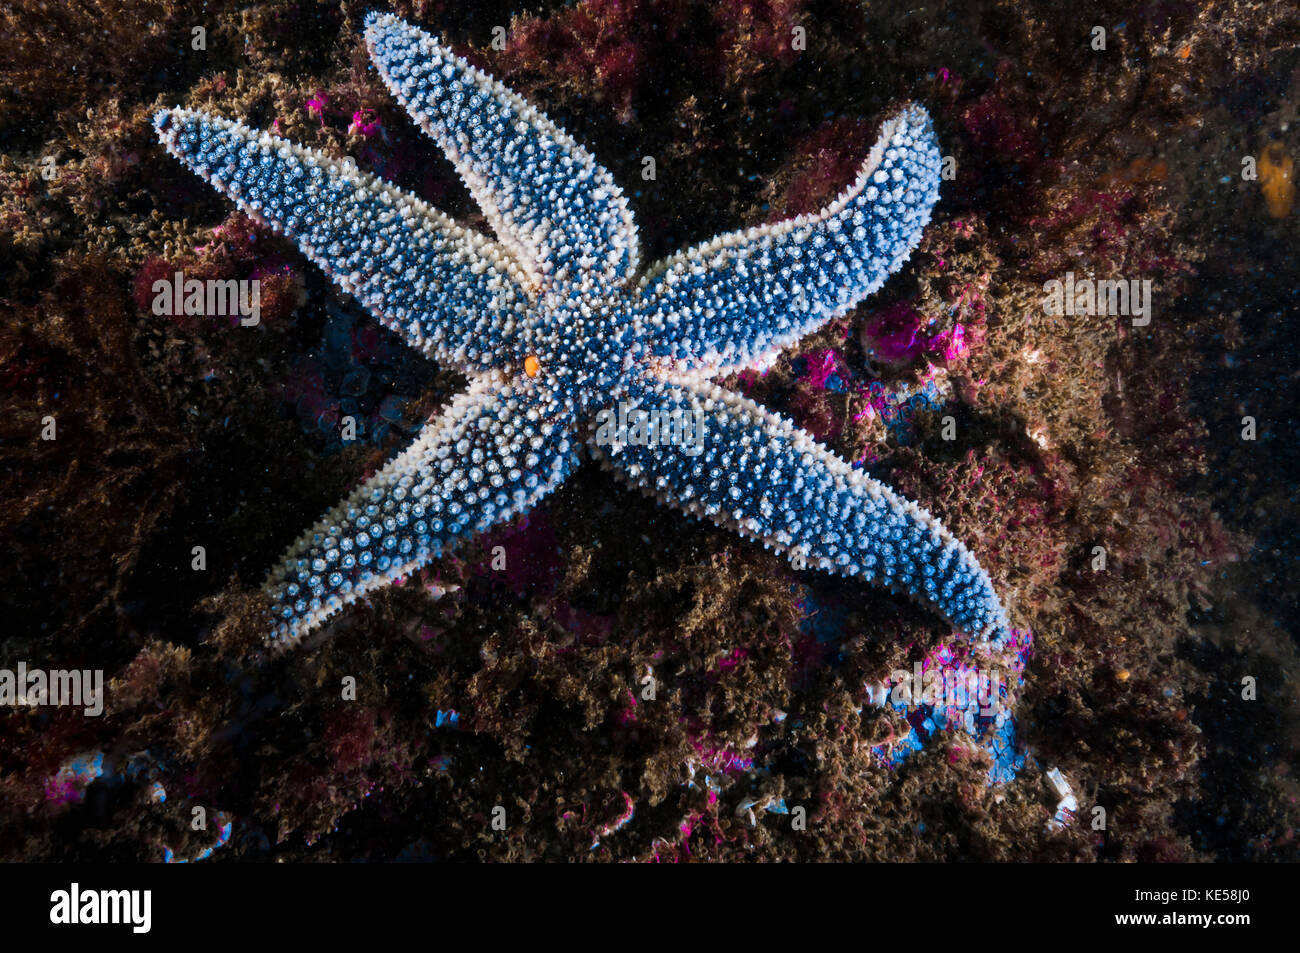 This Forbes common sea star is found in northeaster waters of Maine. Stock Photo